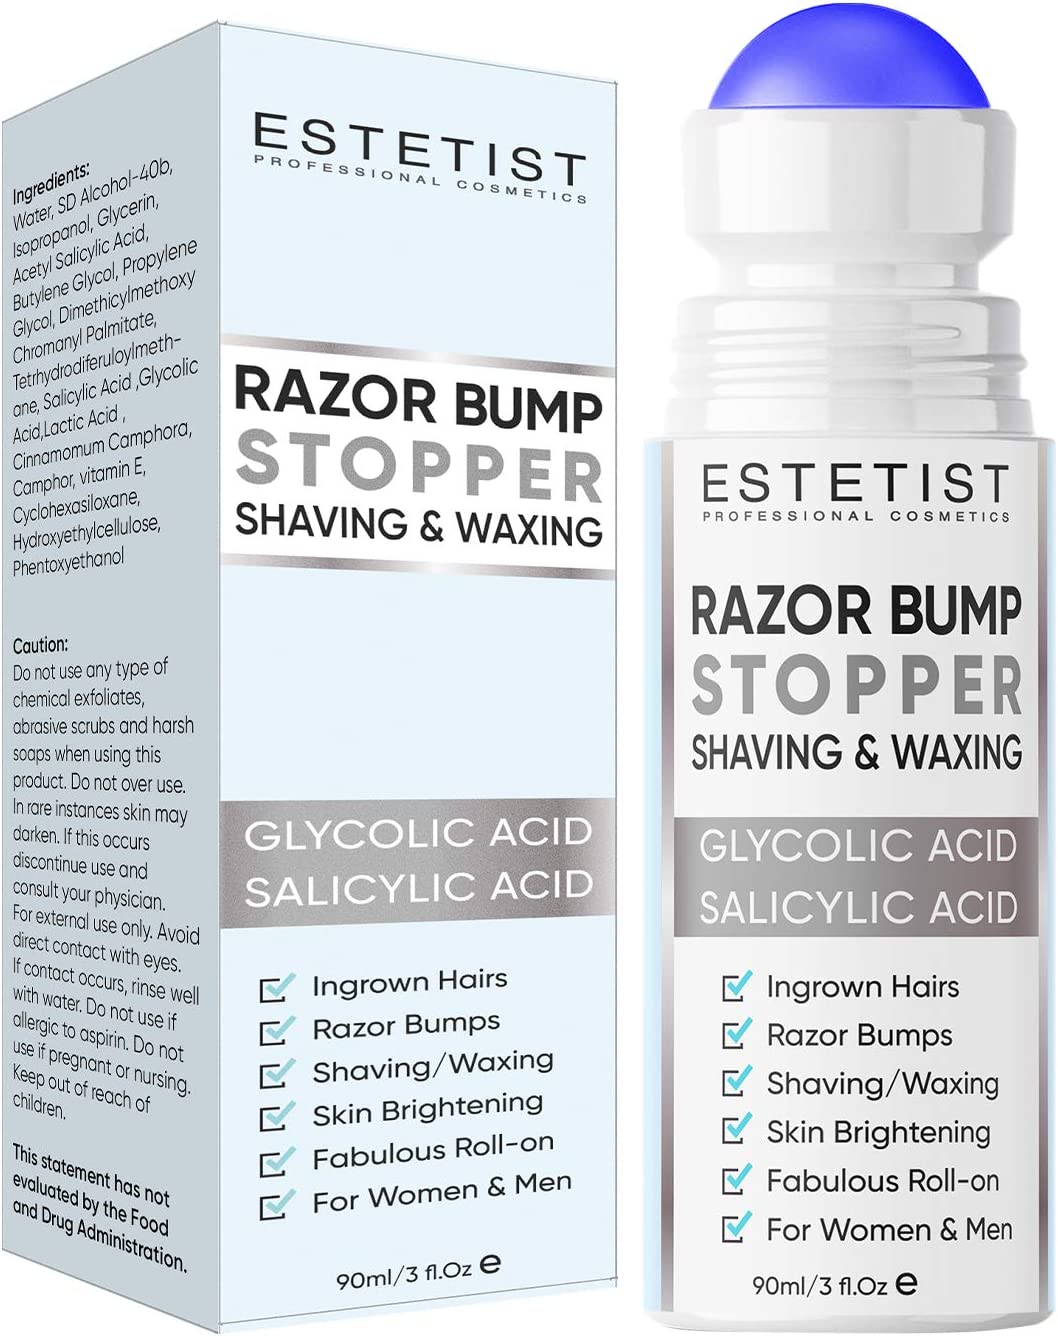 Razor Bump Stopper Solution for Ingrown Hair – Skin Care Treatment for Face, Neck, Bikini Area, Legs and Underarm Area – After Shave Serum for Men and Women – With Salicylic Acid, Glycolic Acid